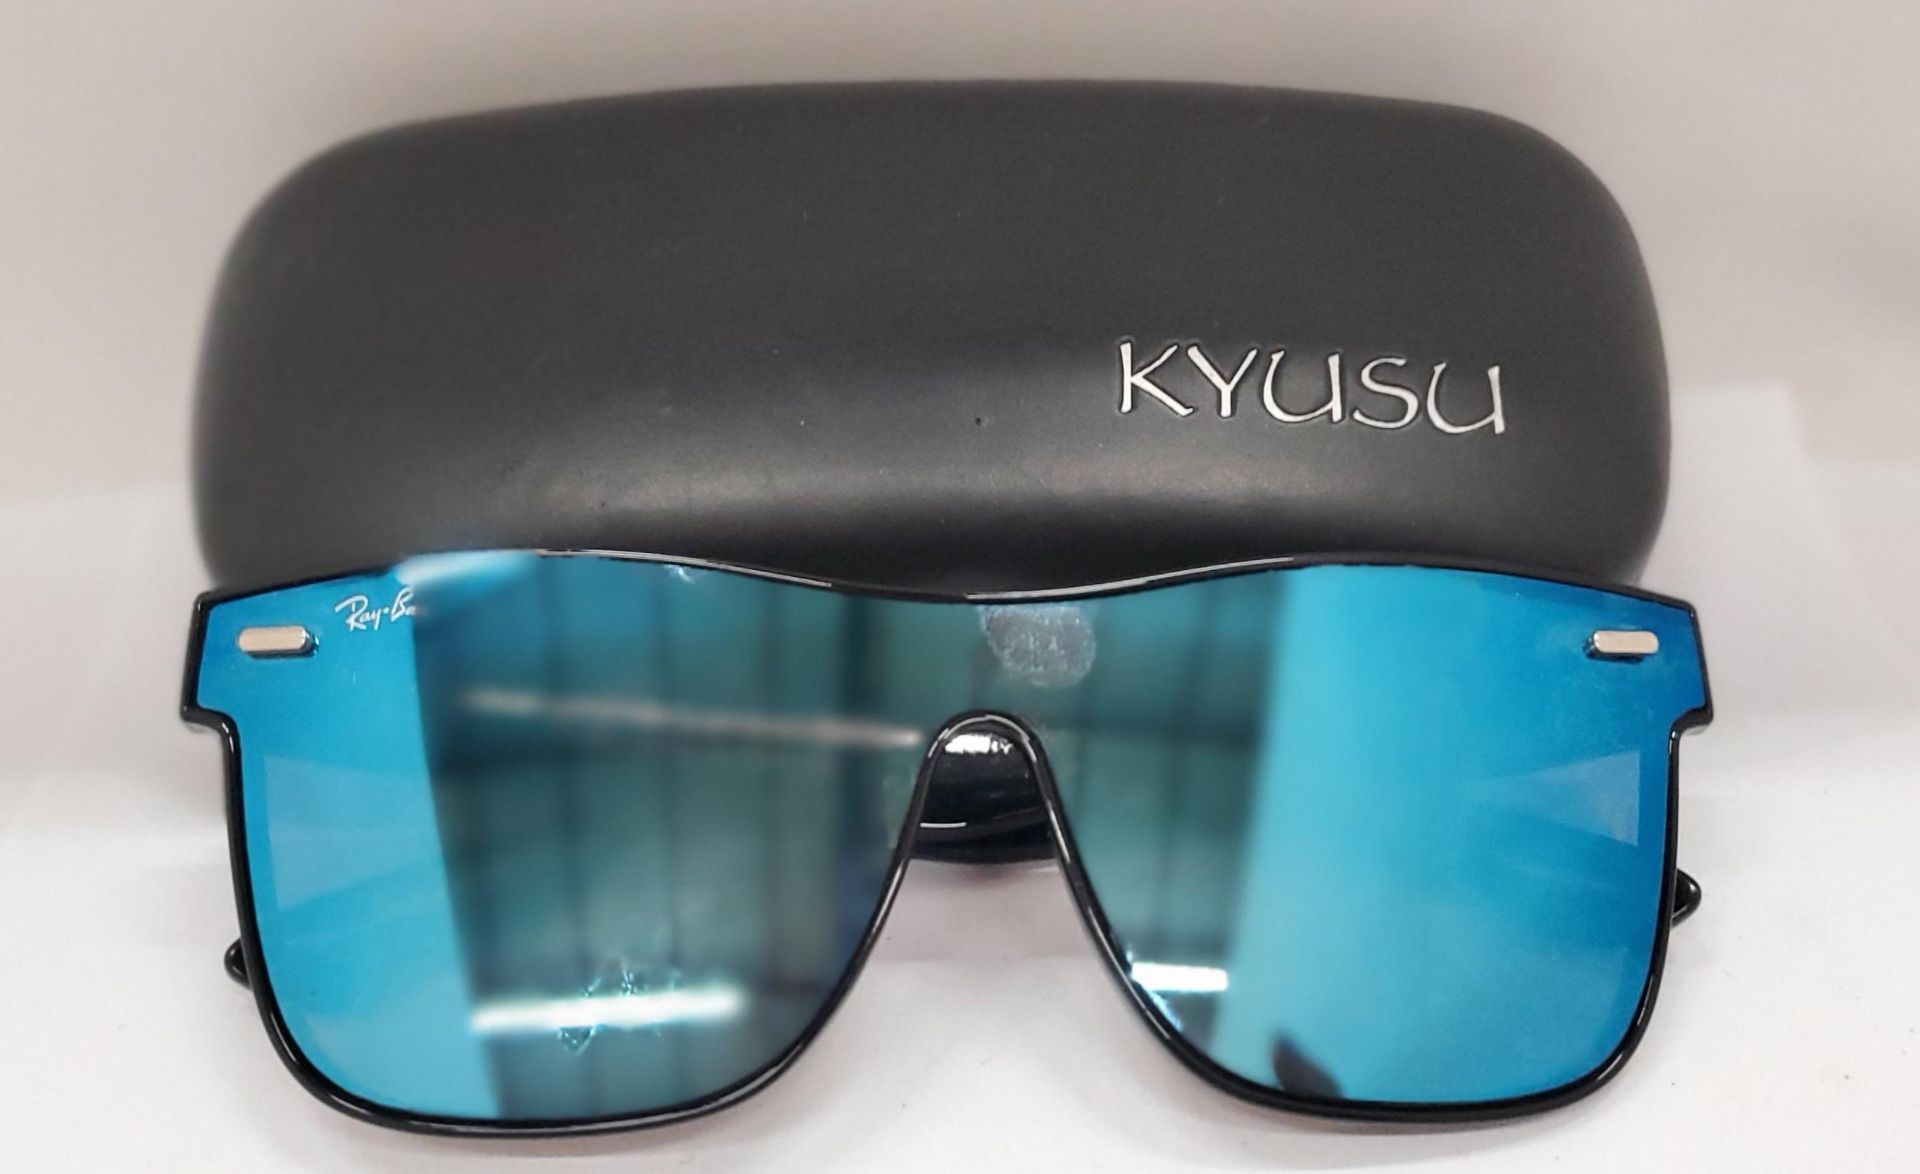 A PAIR OF SUNGLASSES MARKED 'RAY-BAN' IN A CASE